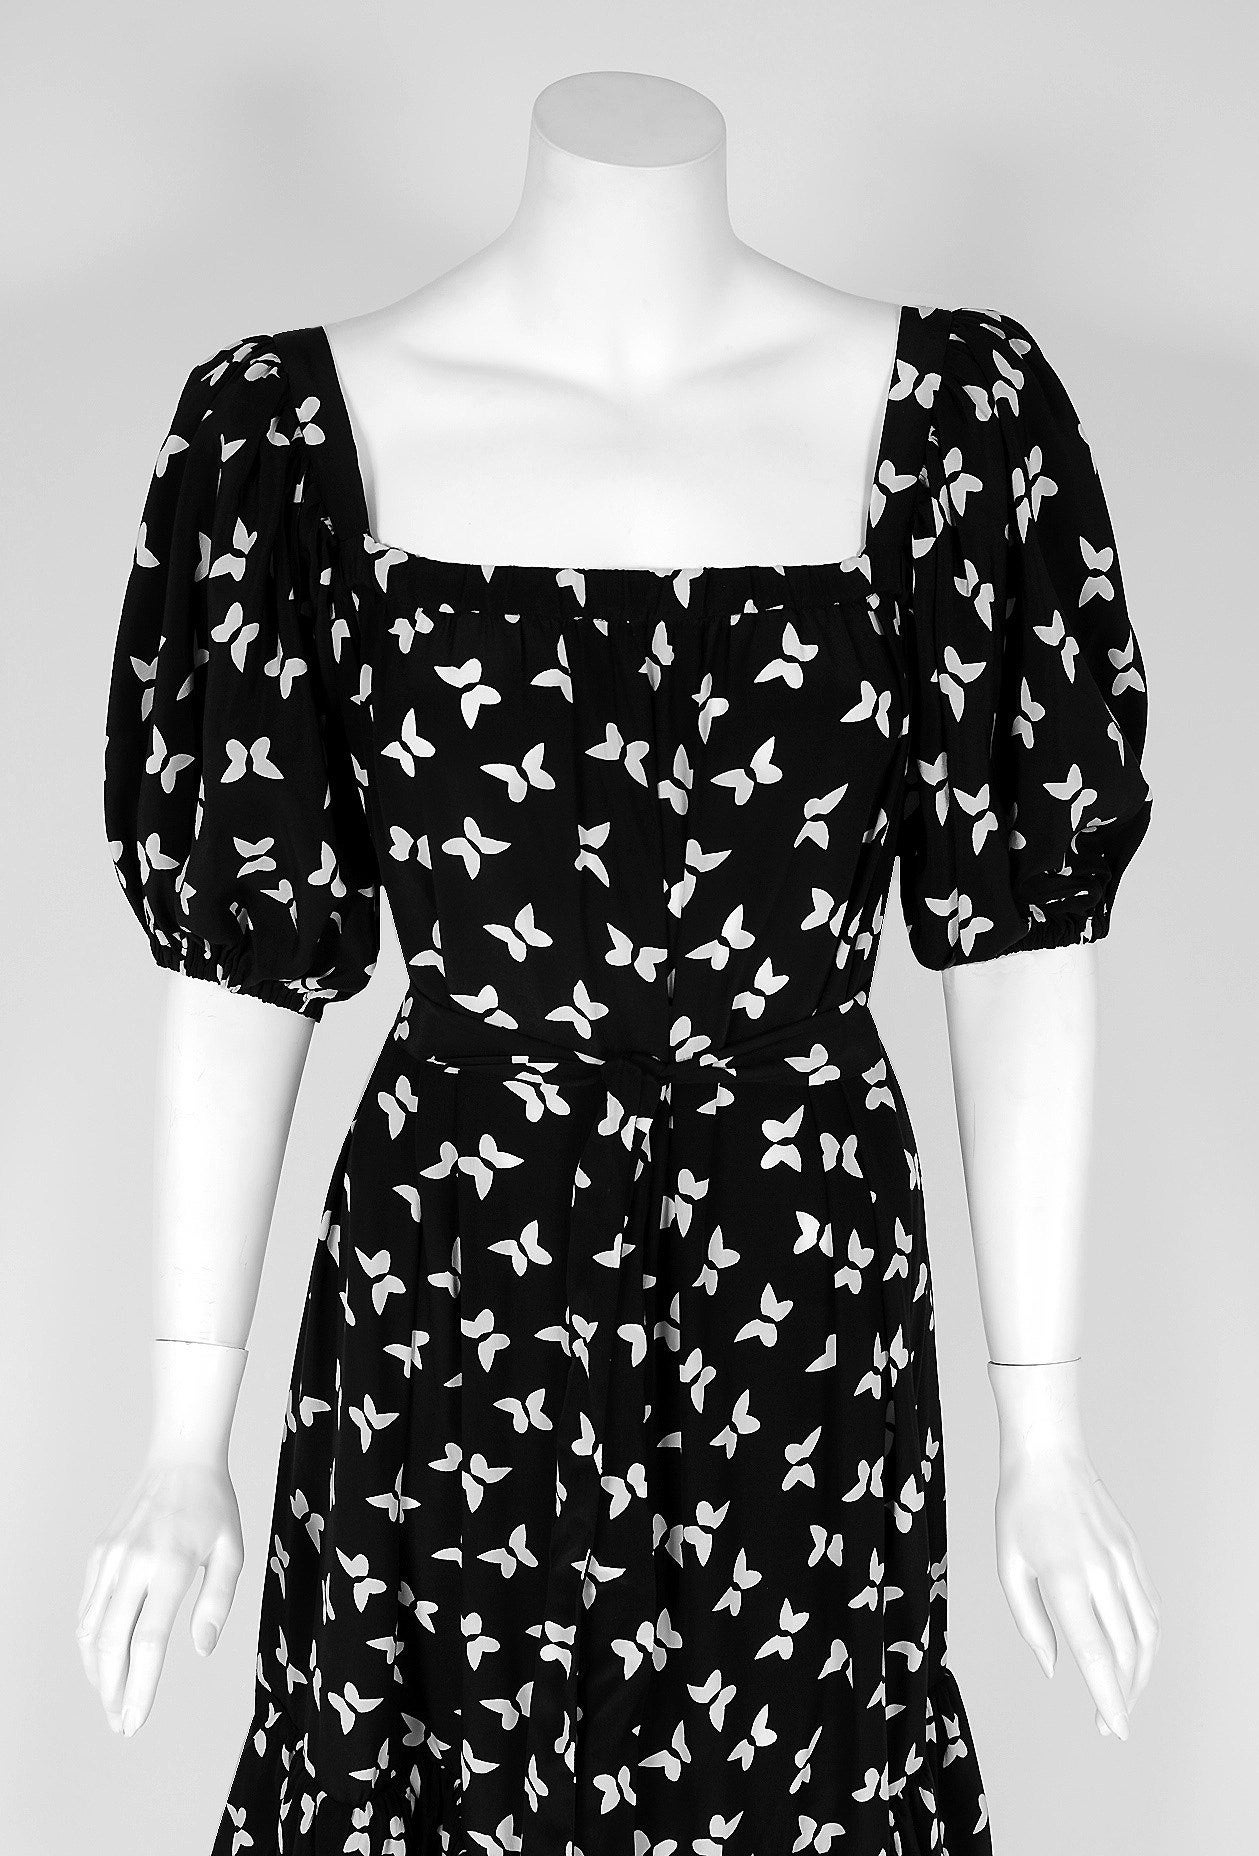 Gorgeous Yves Saint Laurent black and white butterfly novelty-print silk dress from the infamous Rive Gauche collection during the mid-1970's. Pieces from this decade are very rare and are true examples of fashion history. I adore the low-cut plunge